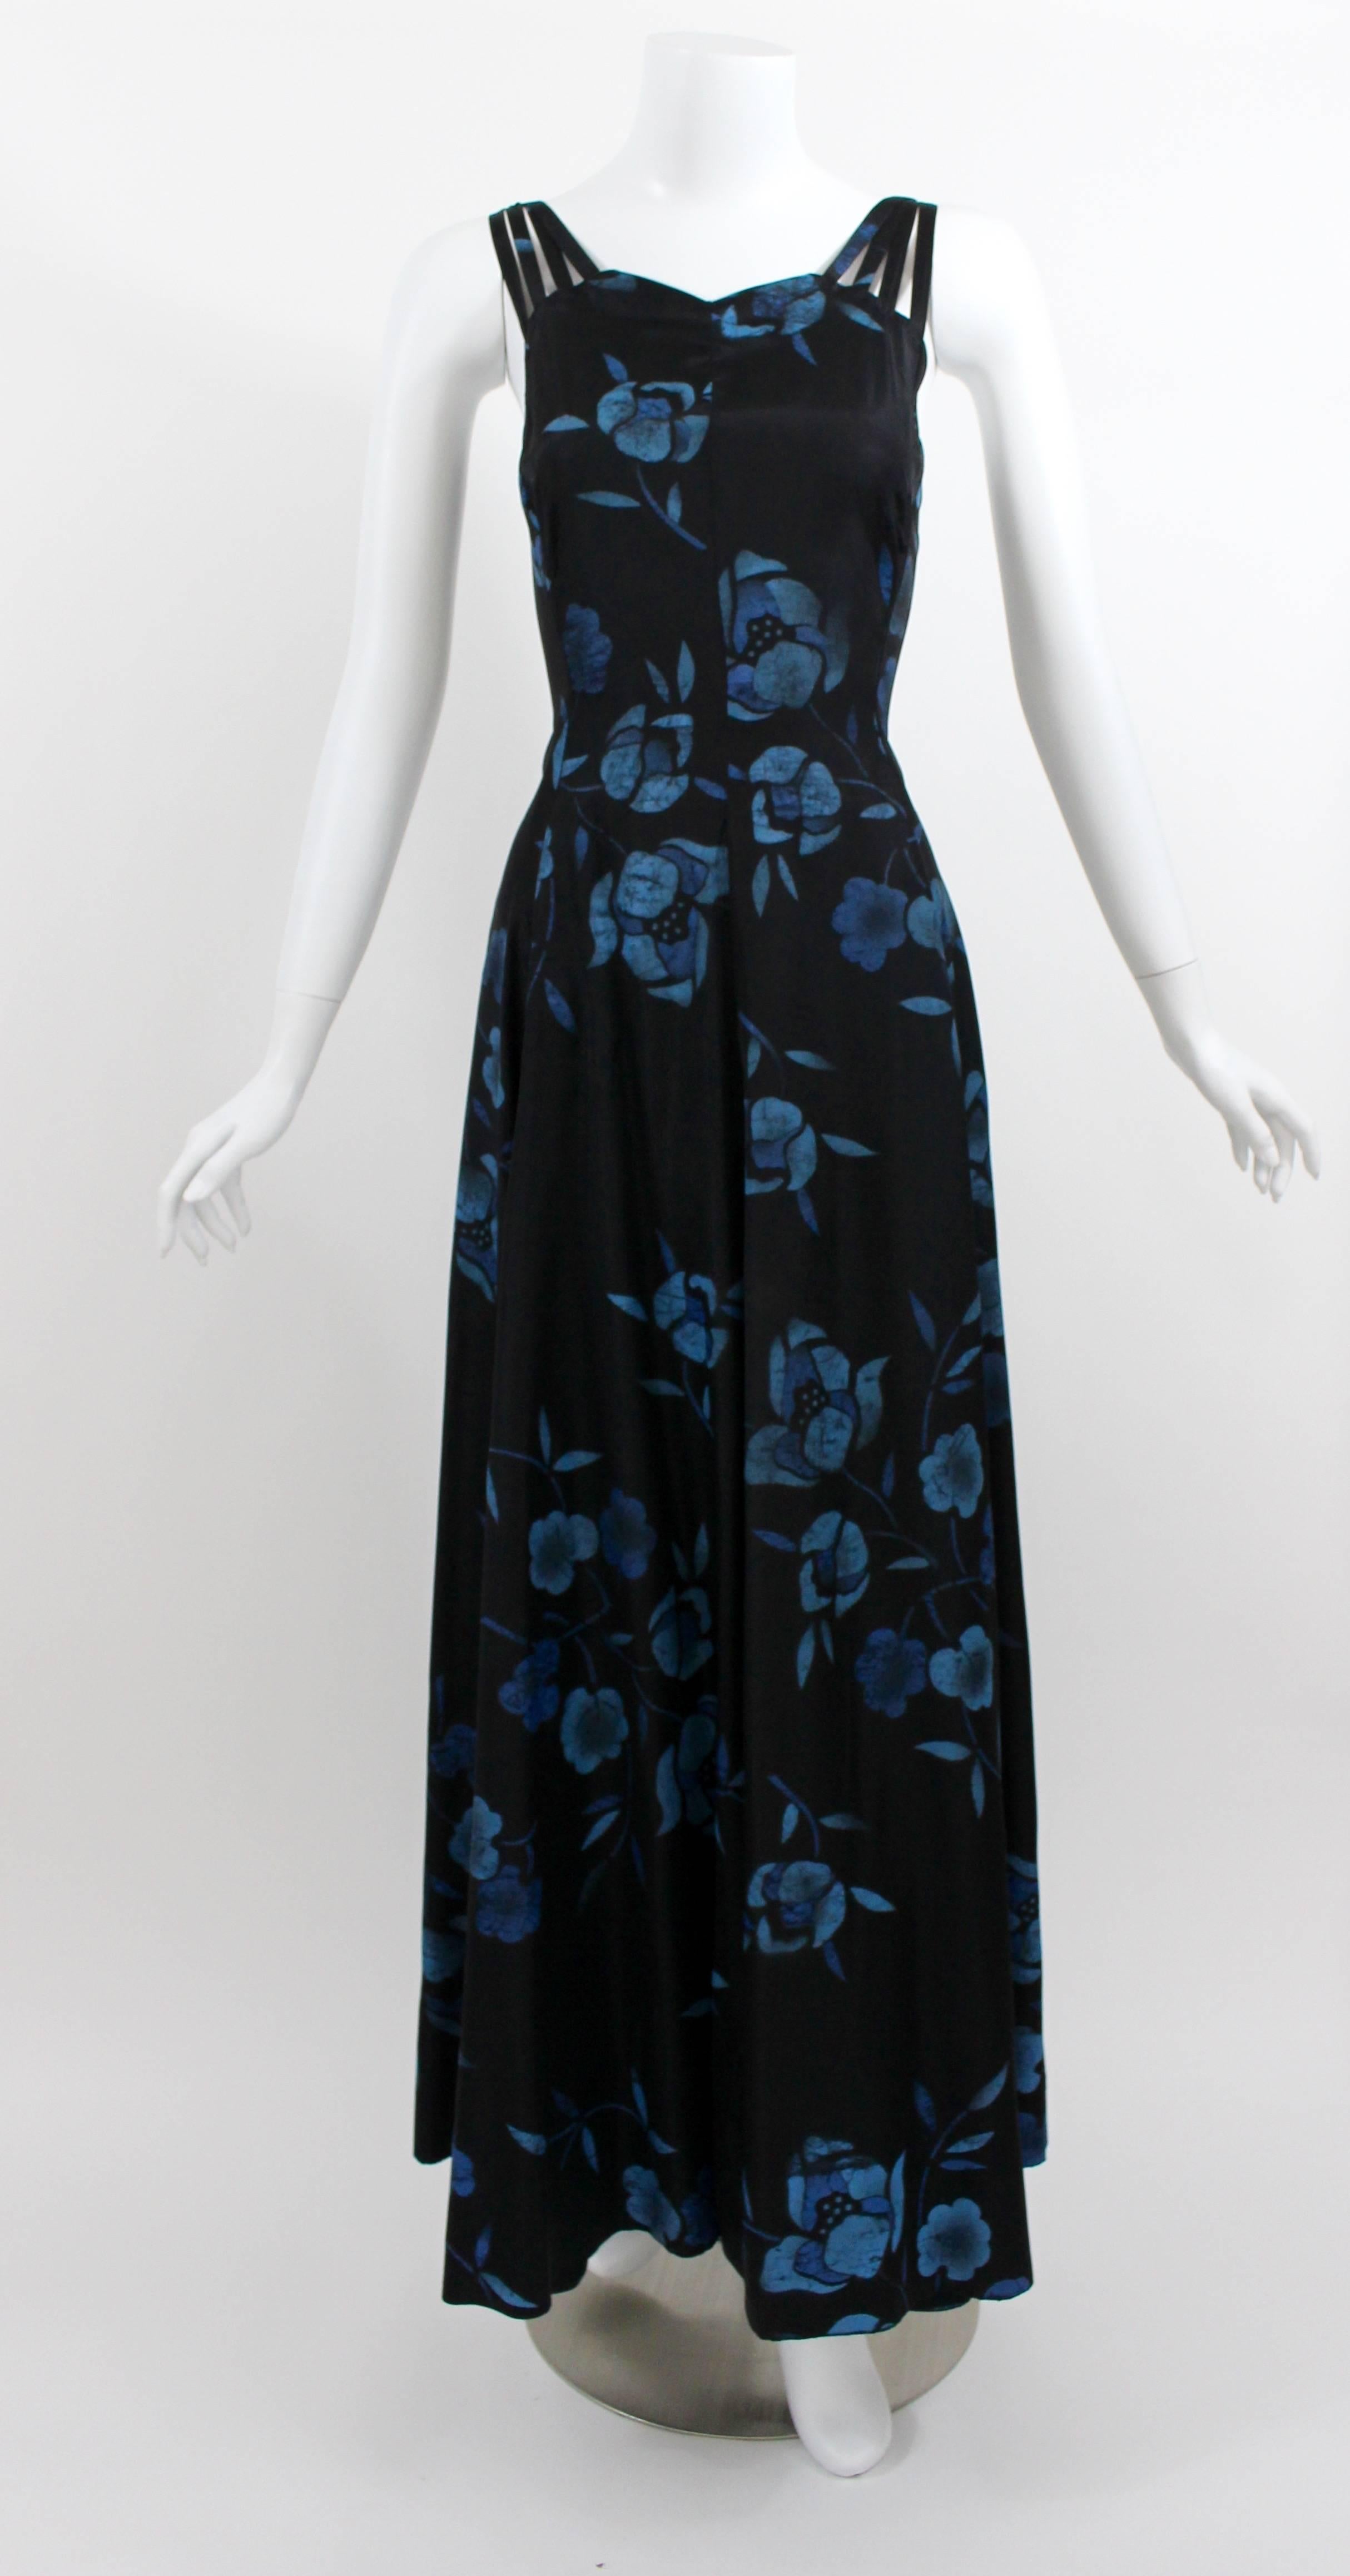 A stunning 1930s taffeta maxi dress. I love the blue batik floral print against the black background. The multiple thin straps from  the shoulders and down to the mid back are sexy and feminine. A fitted waist and a long full skirt with a hem sweep